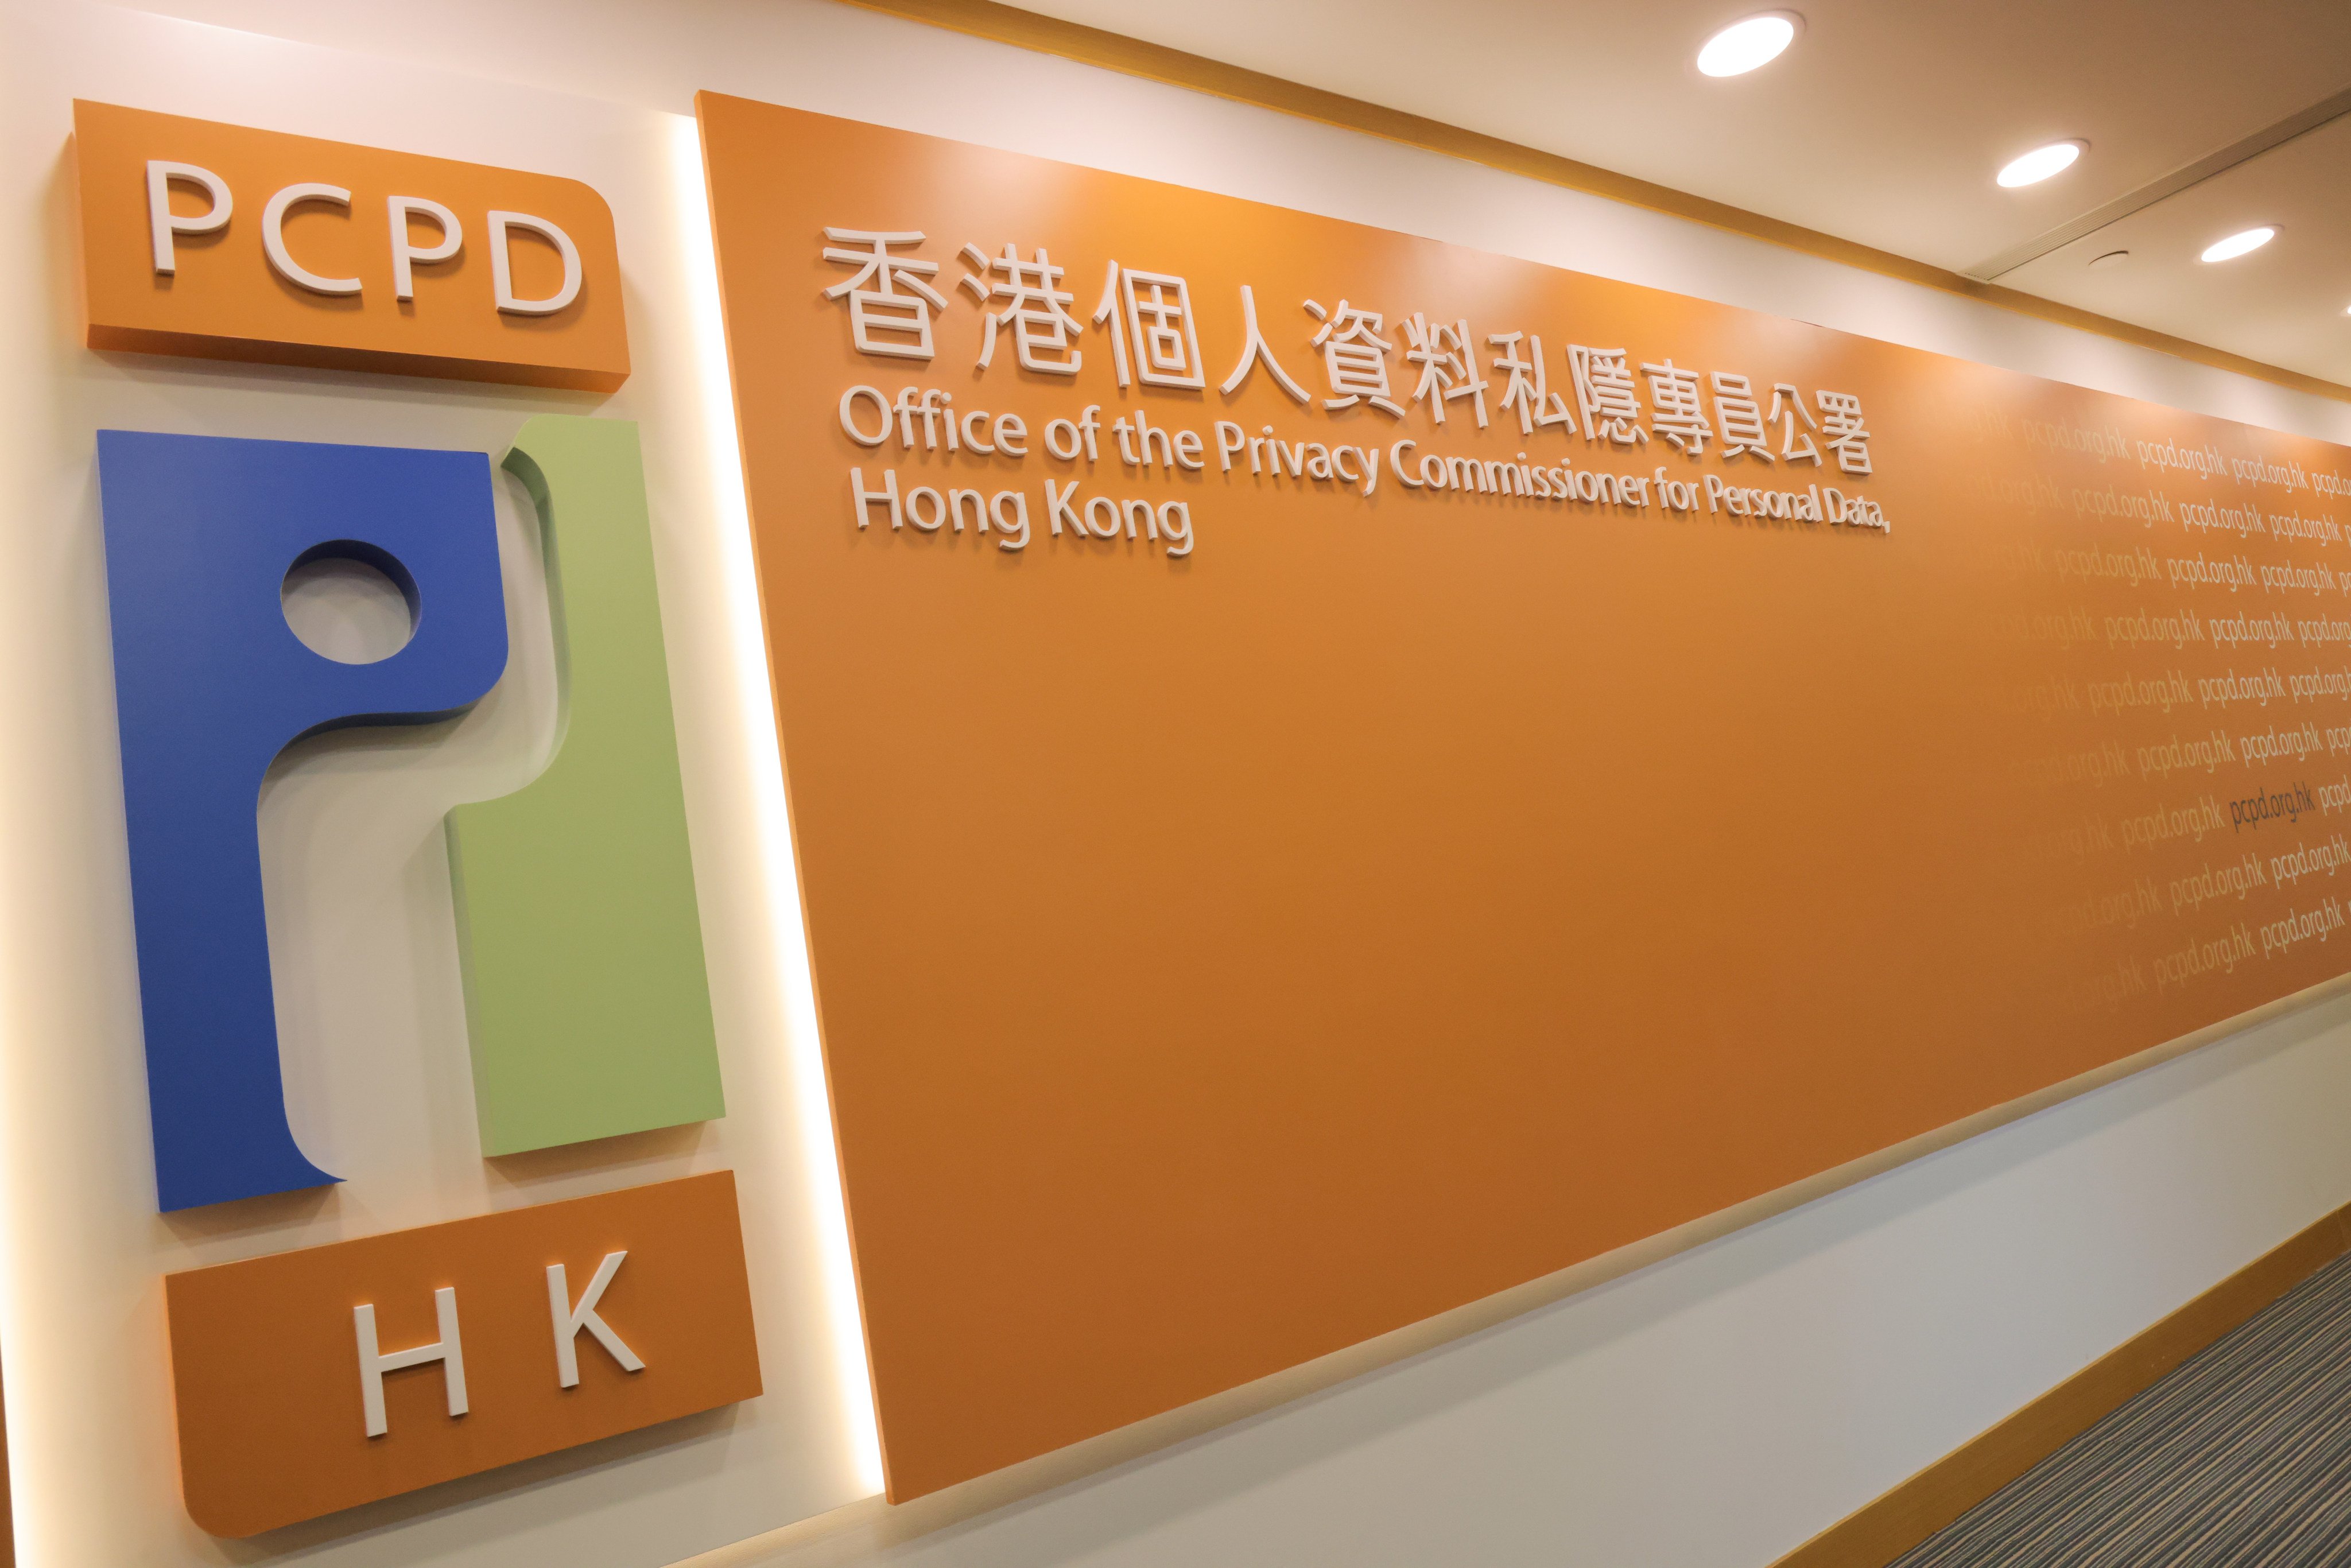 Hong Kong’s Companies Registry is consulting the Office of the Privacy Commissioner for Personal Data regarding the incident. Photo: Jelly Tse